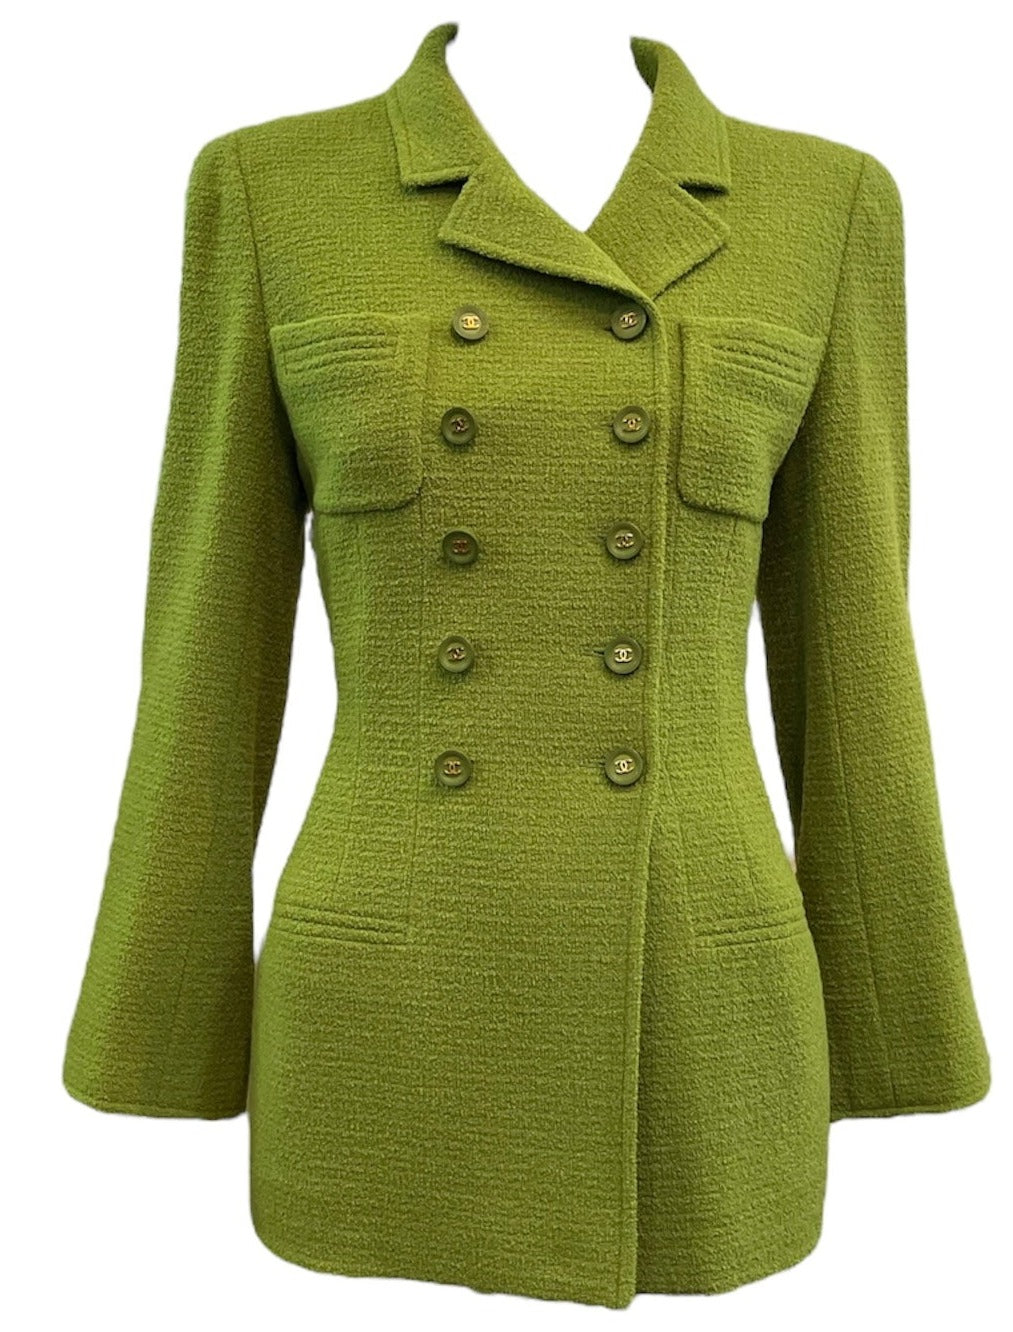   Chanel 90s Lime Green Wool Jacket with Silk Lining  FRONT 1 of 6